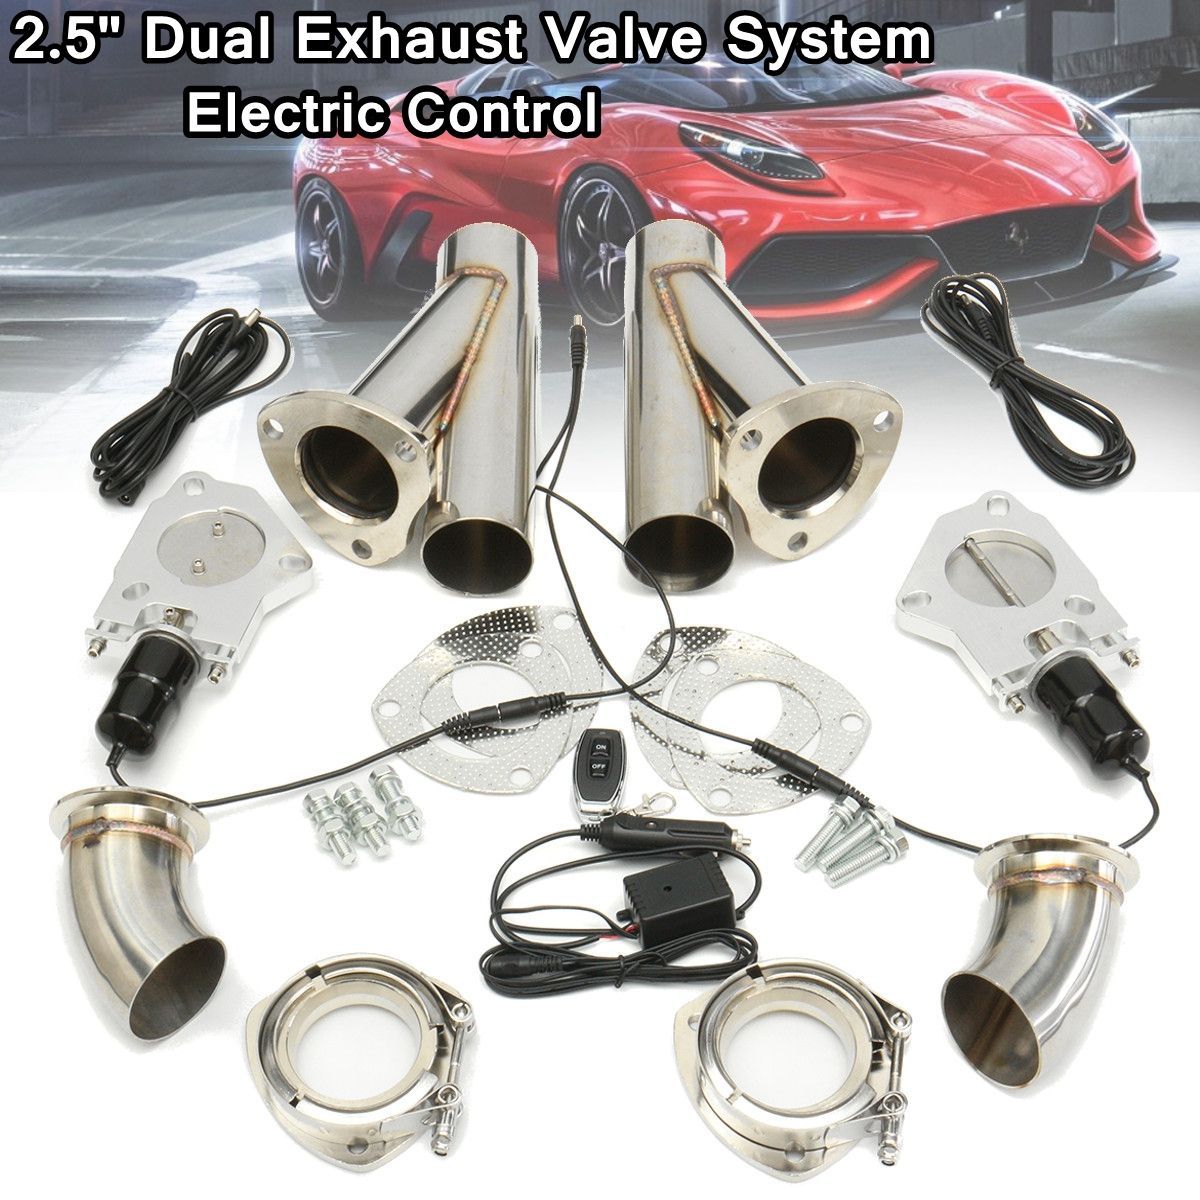 25-Inch-63mm-Dual-Electric-Exhaust-Muffler-Valve-System-Cutout-Pipe-Kit-with-Remote-Control-Stainles-1191861